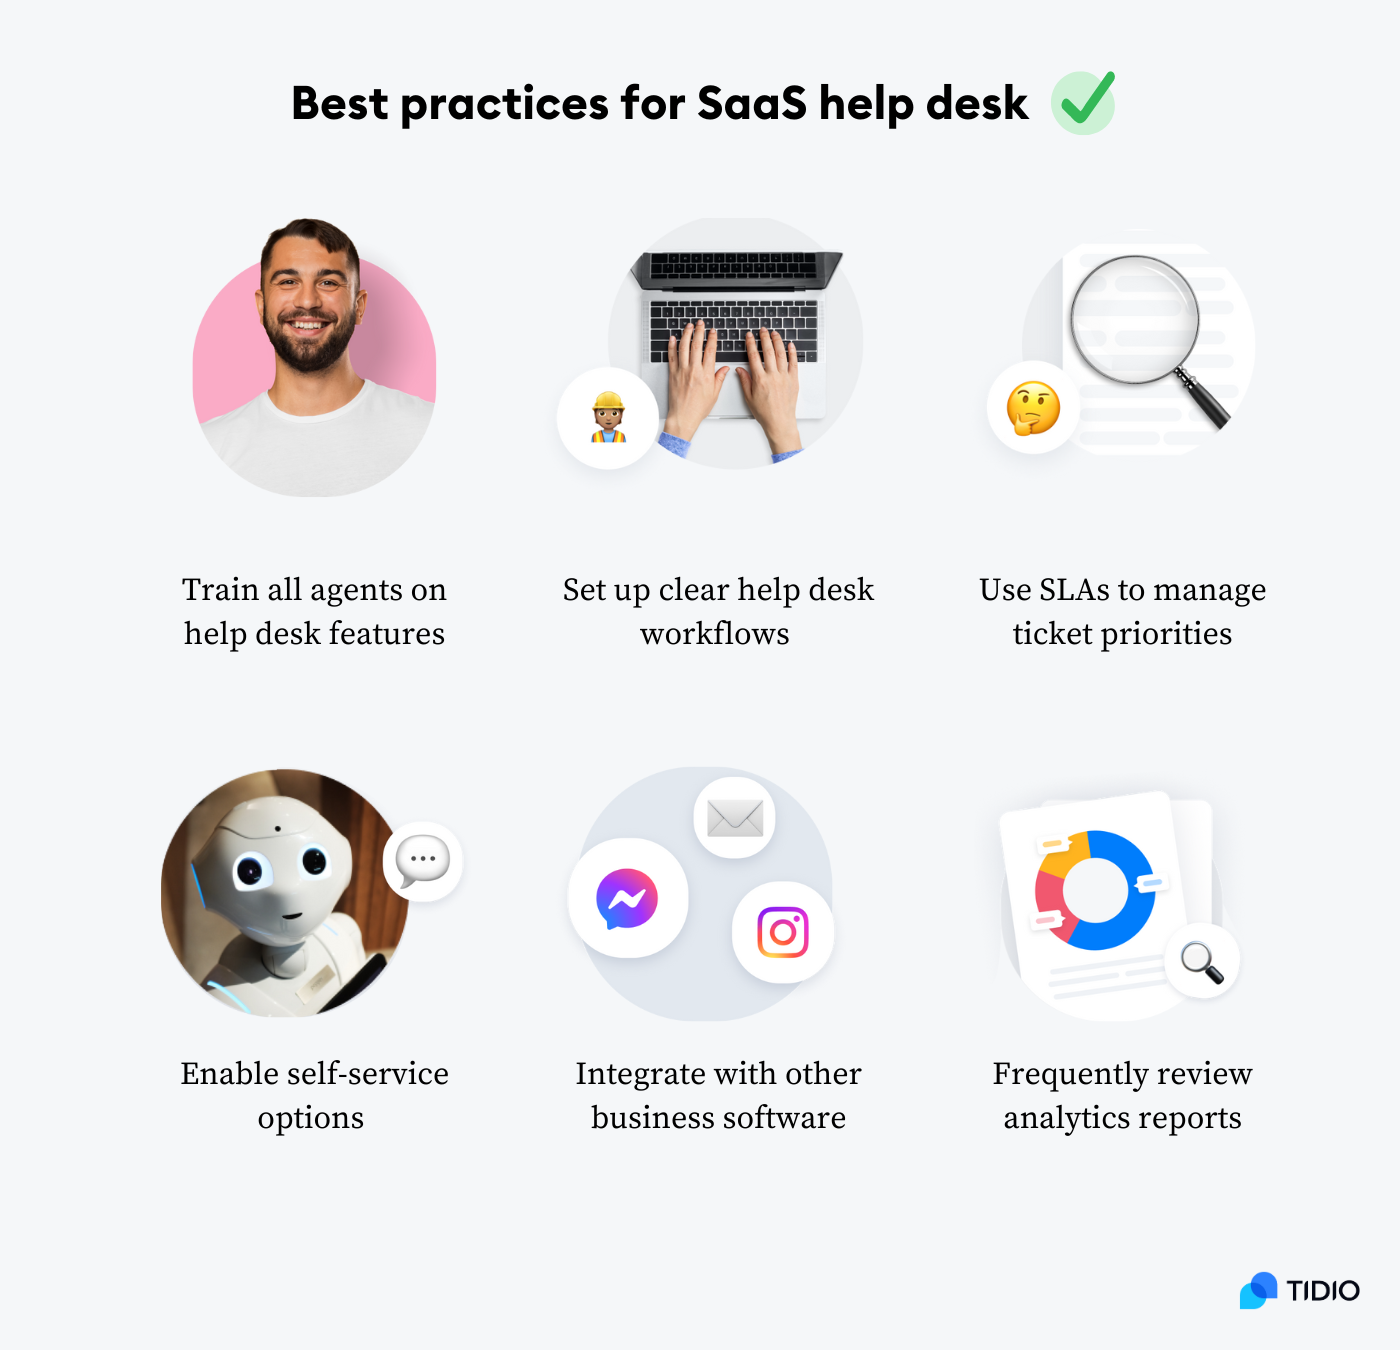 best practices for saas help desk software listed on image